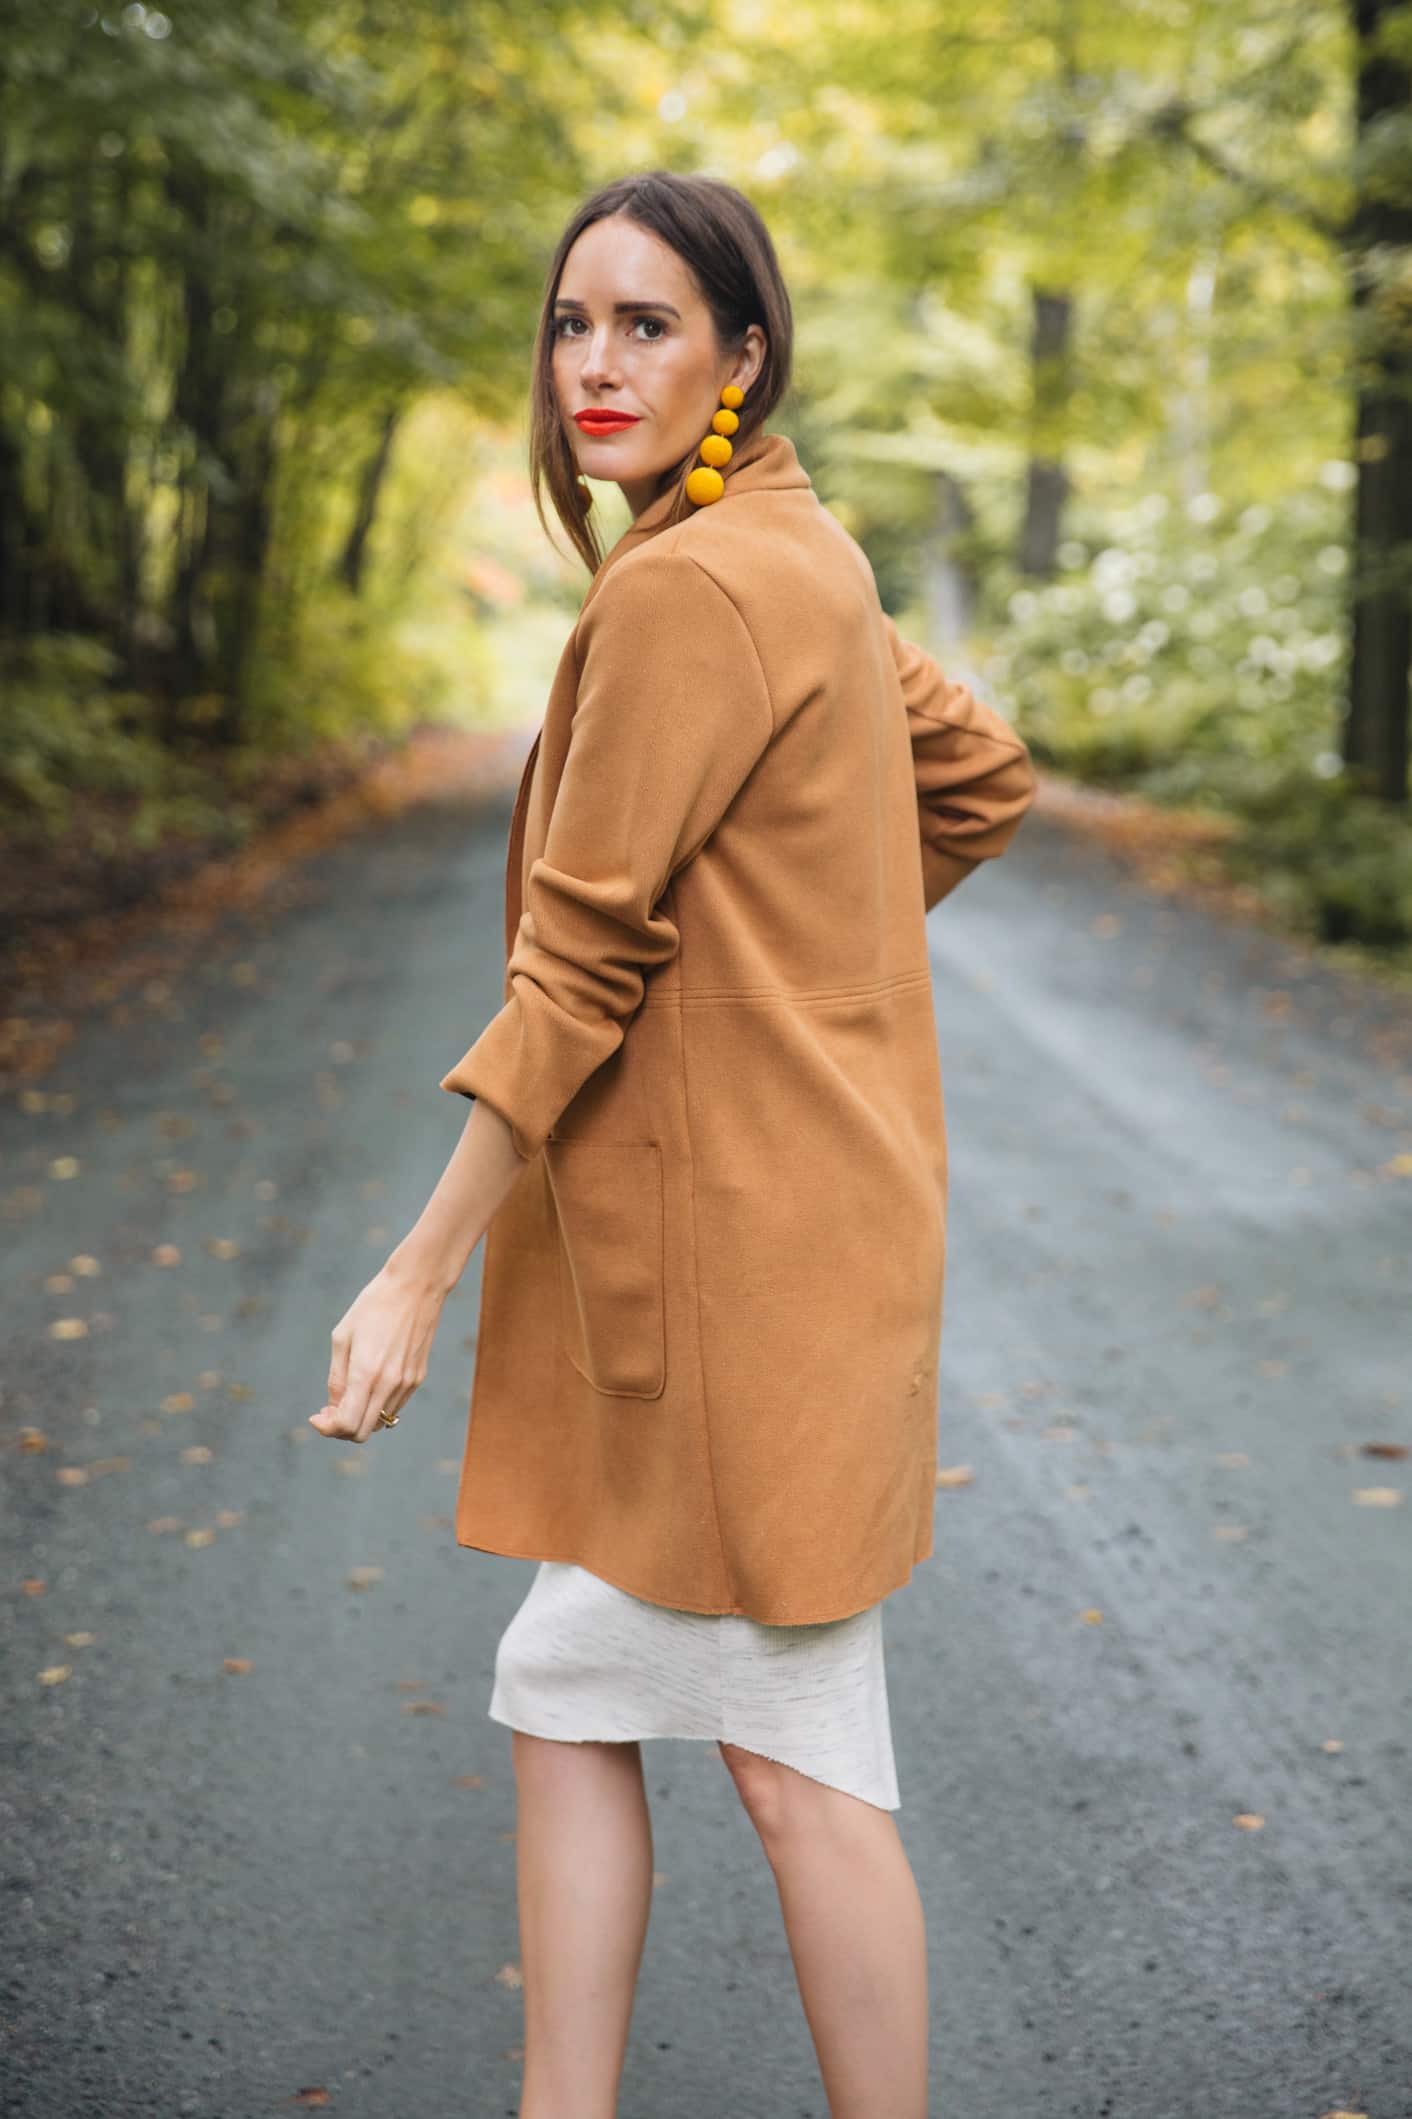 Louise Roe wearing a camel coat for fall in Vermont